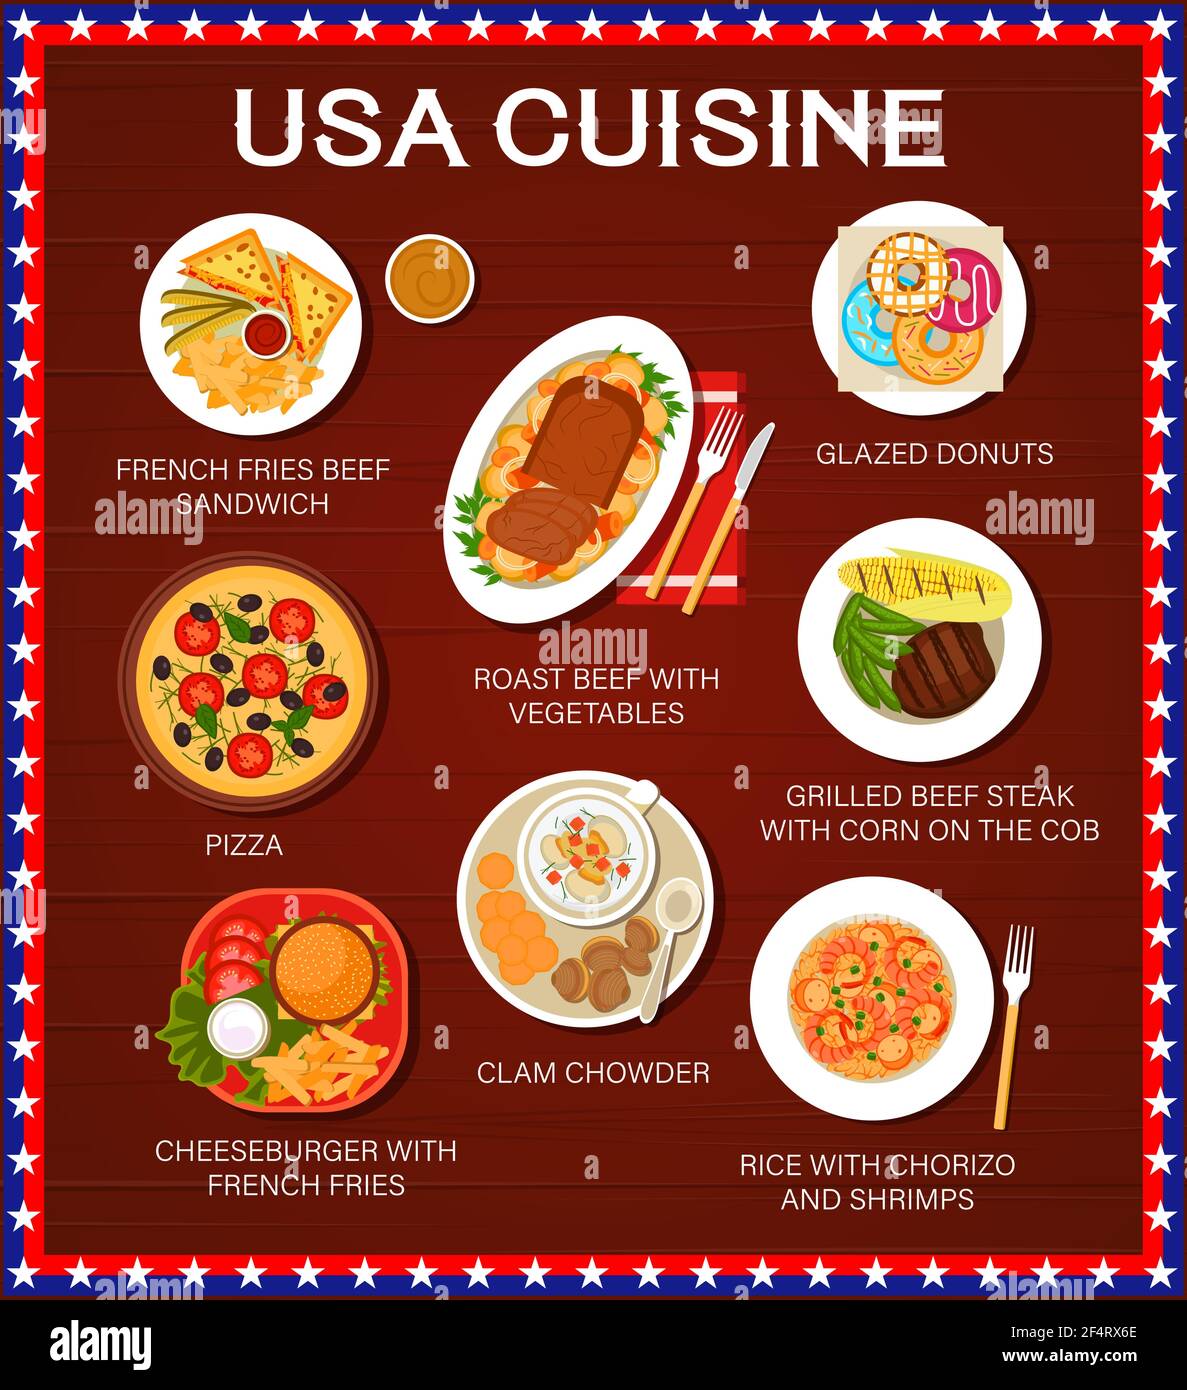 USA cuisine food menu, American dishes and meals traditional restaurant lunch and dinner, vector poster. US American food menu of sandwich with french Stock Vector